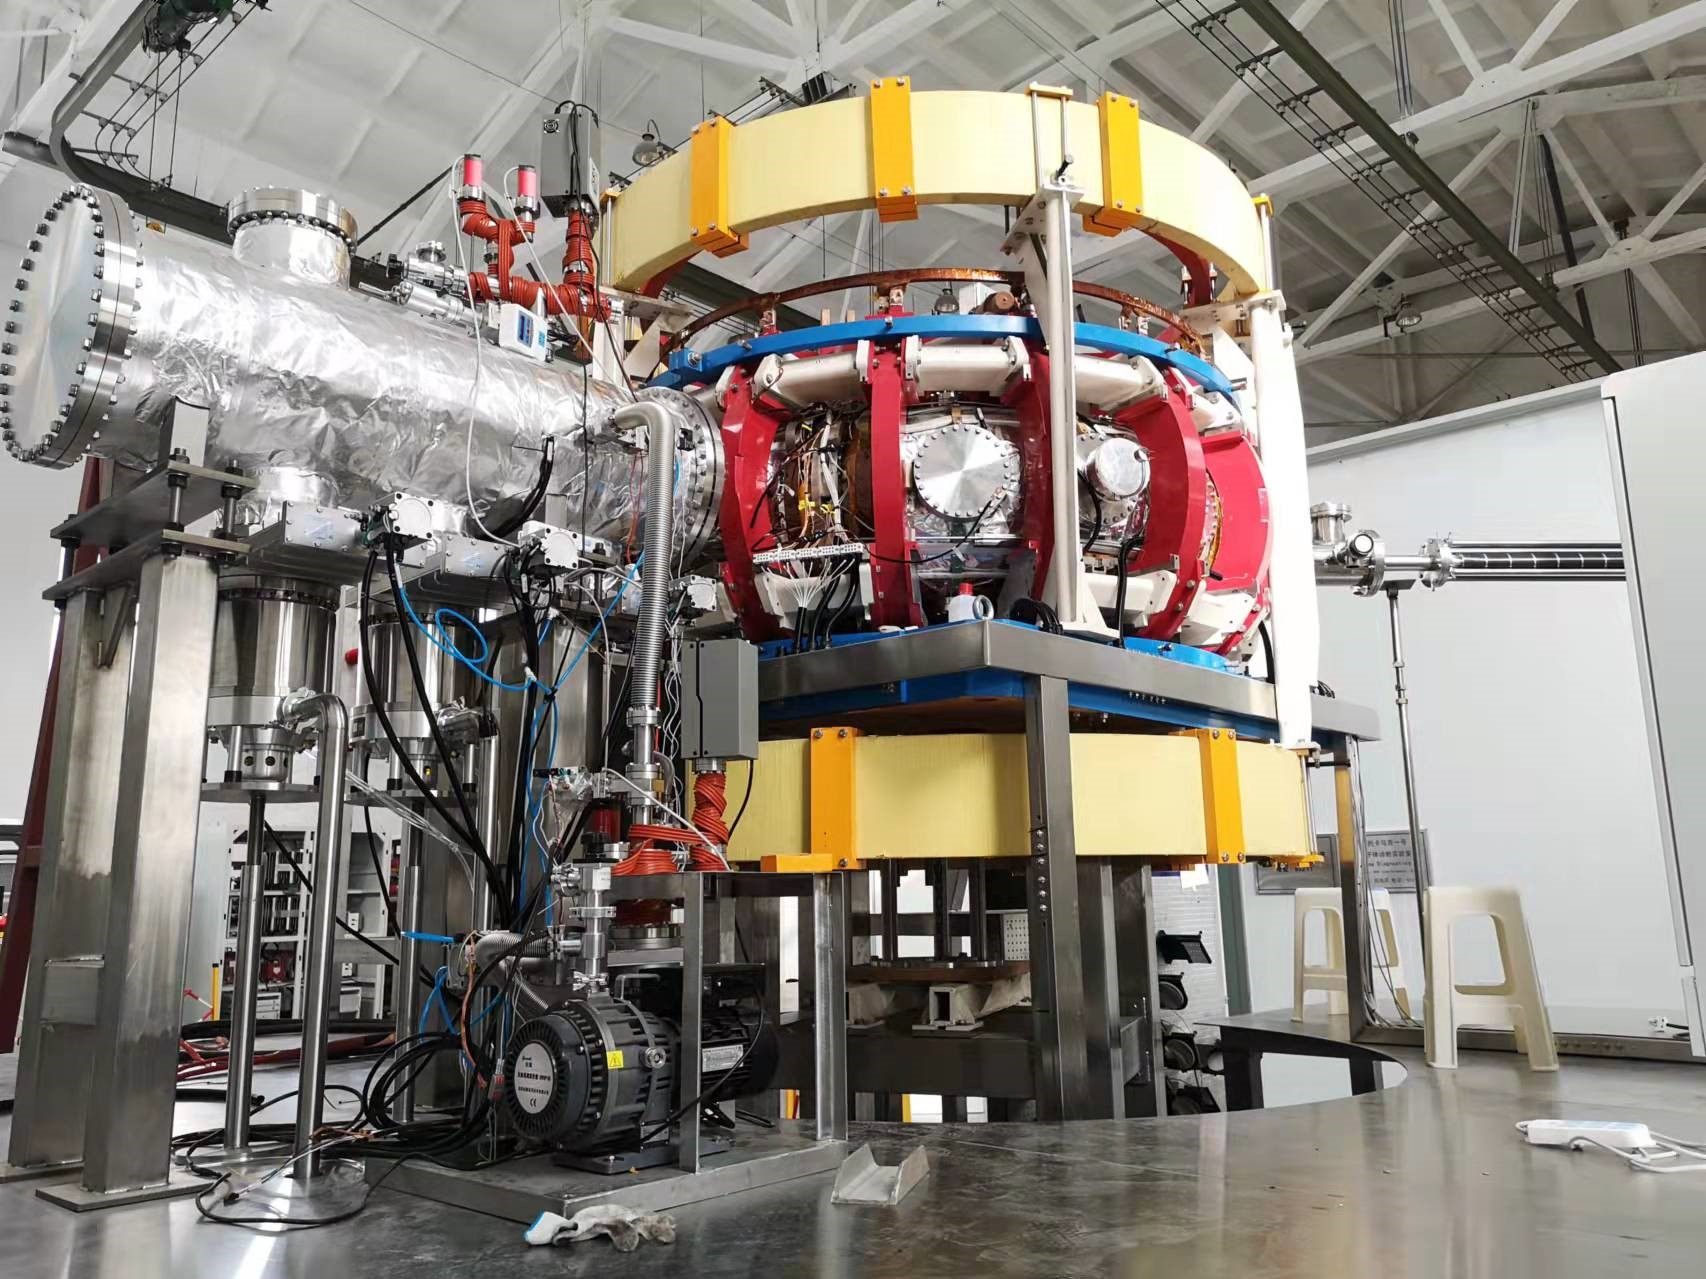 Thailand debuts first tokamak with help of Chinese scientists